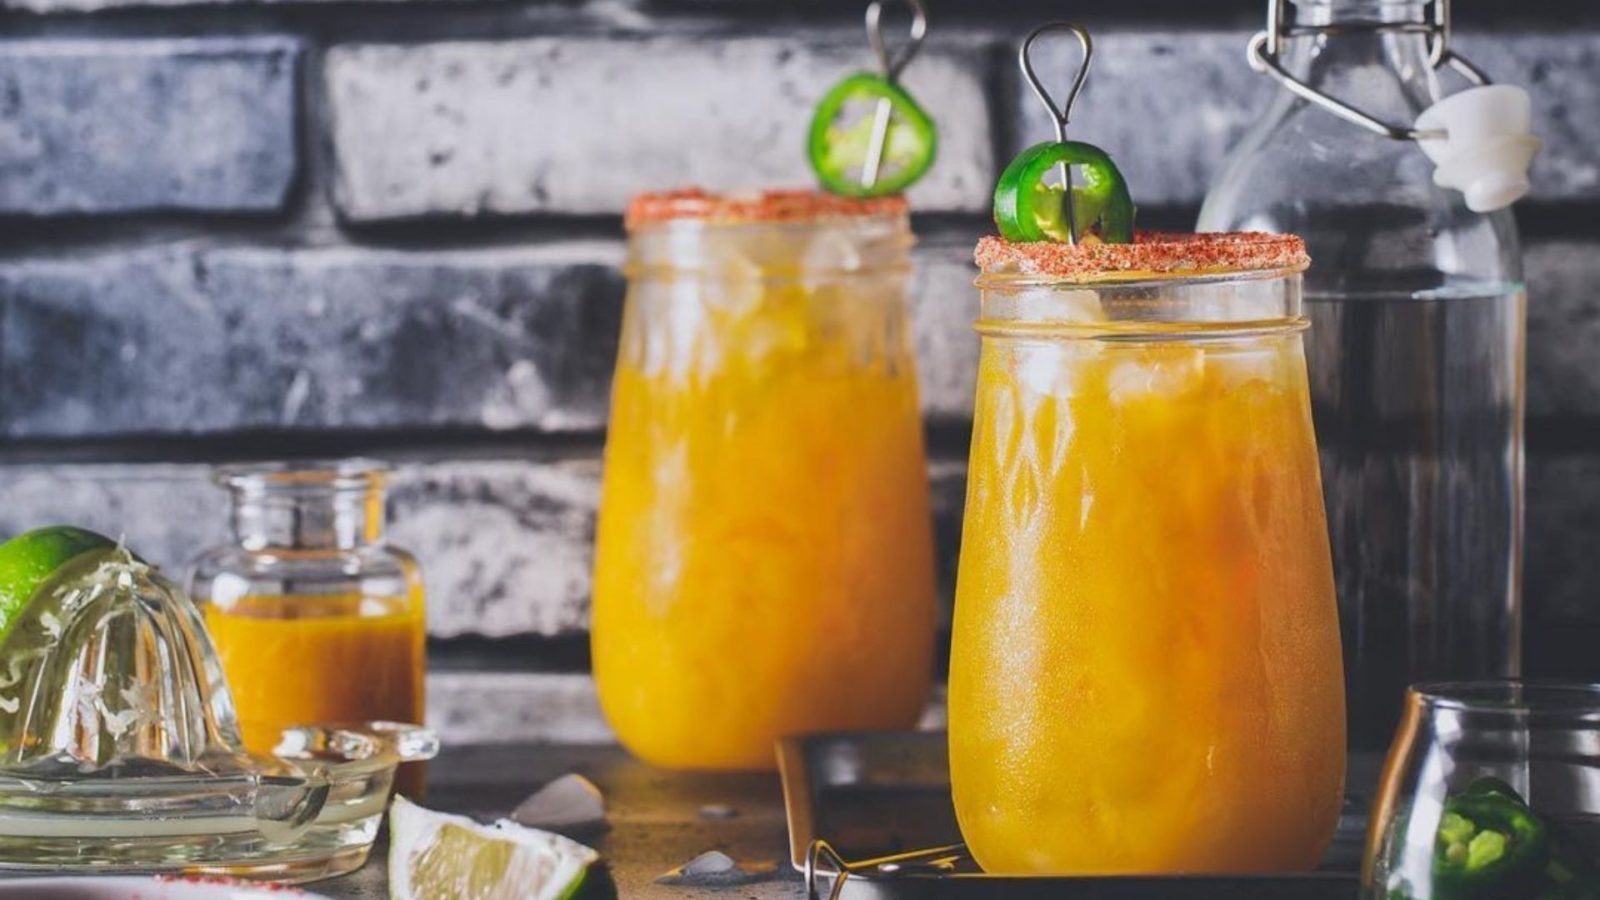 Add a tropical touch to booze hour with these refreshing mango cocktail recipes